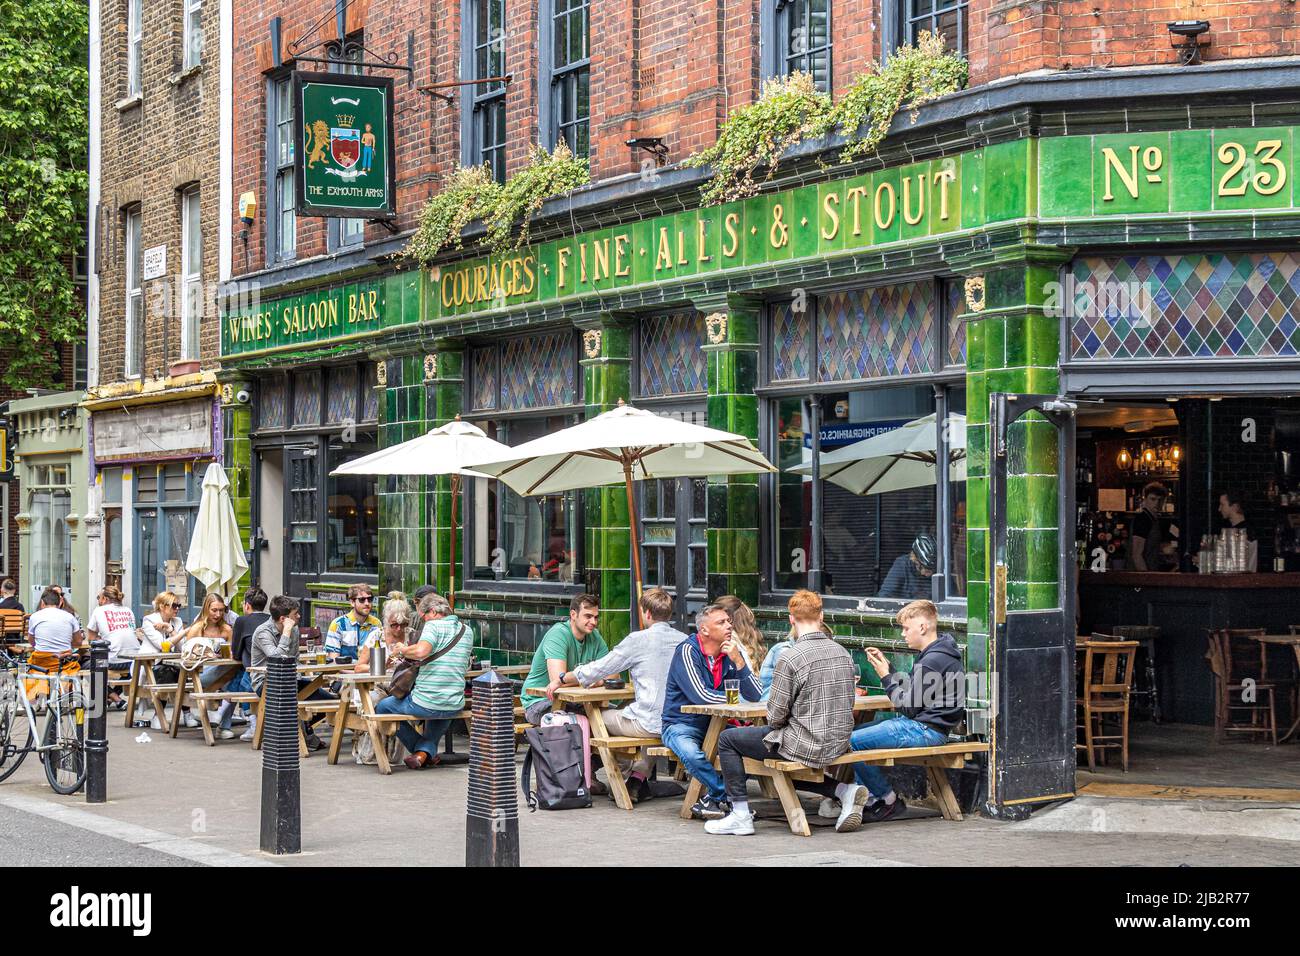 People enjoying a drink outside The Exmouth Arms on Exmouth Market, semi pedestrianised street in Clerkenwell ,London EC1 Stock Photo